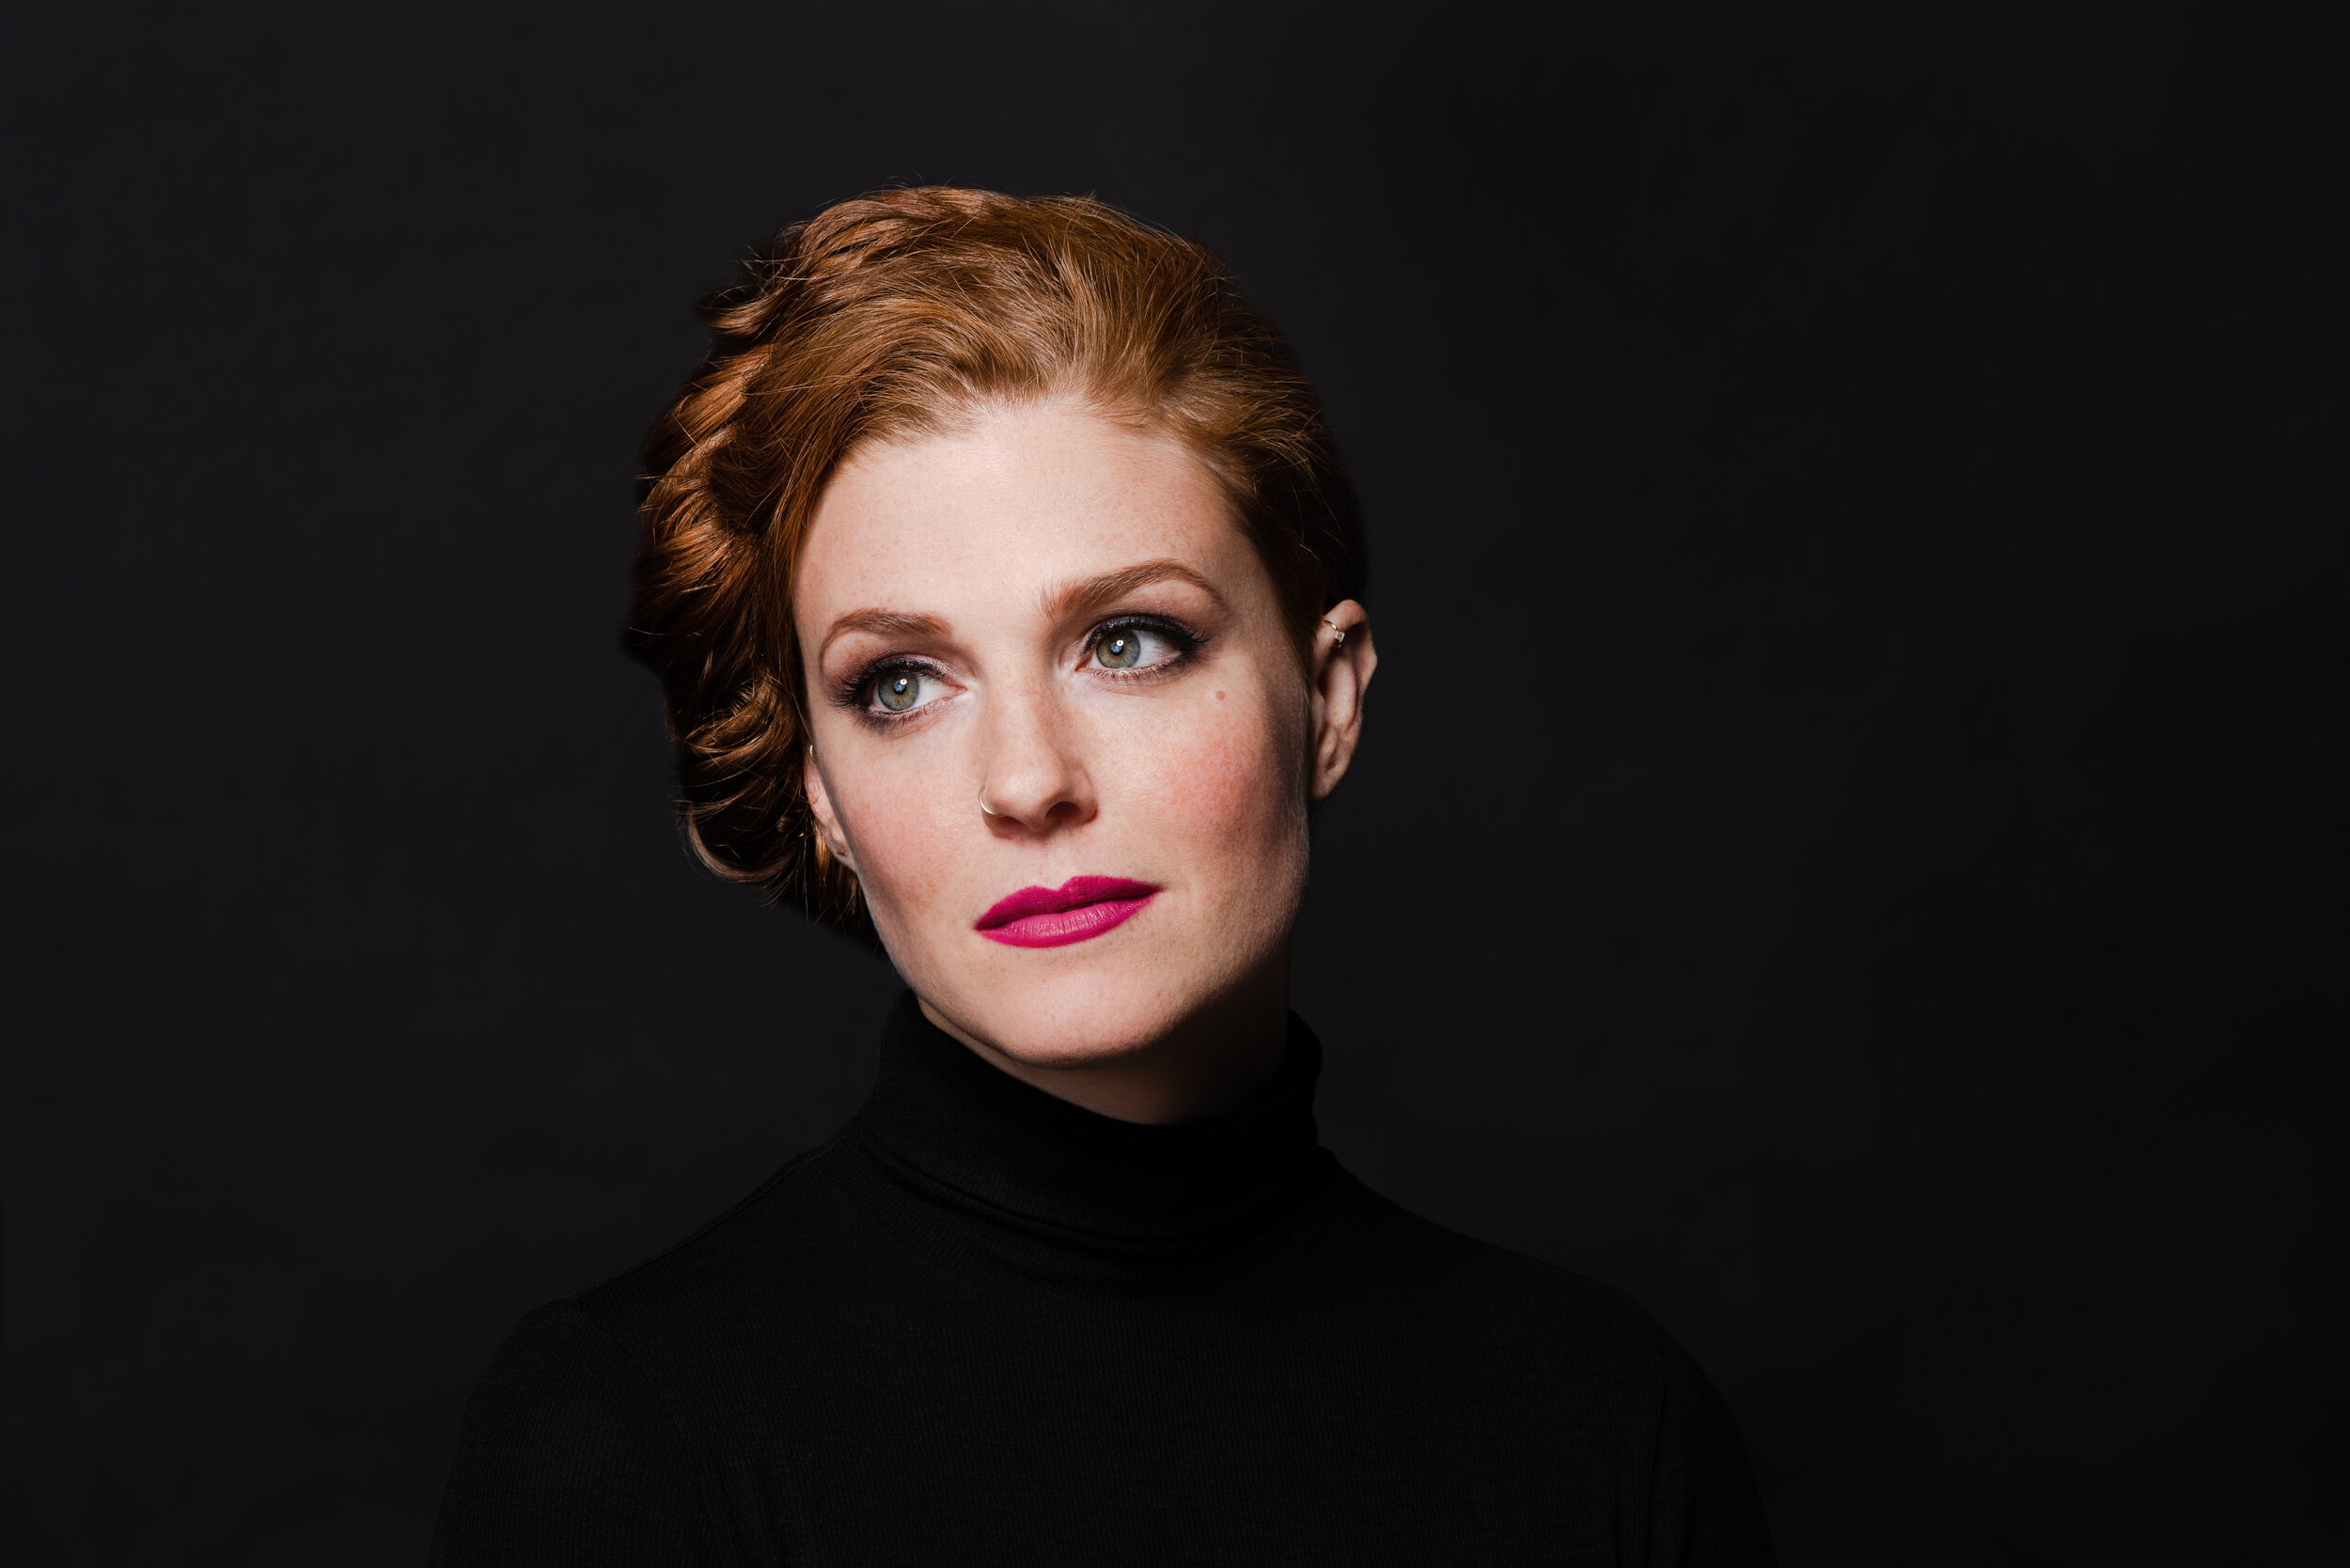  “Canadian mezzo soprano Wallis Giunta is a star of the future who really lives her songs…painting vivid dramatic or psychological portraits with an operatic quality even in the more restrained world of Lieder. Two lullabies by Benjamin Britten were 